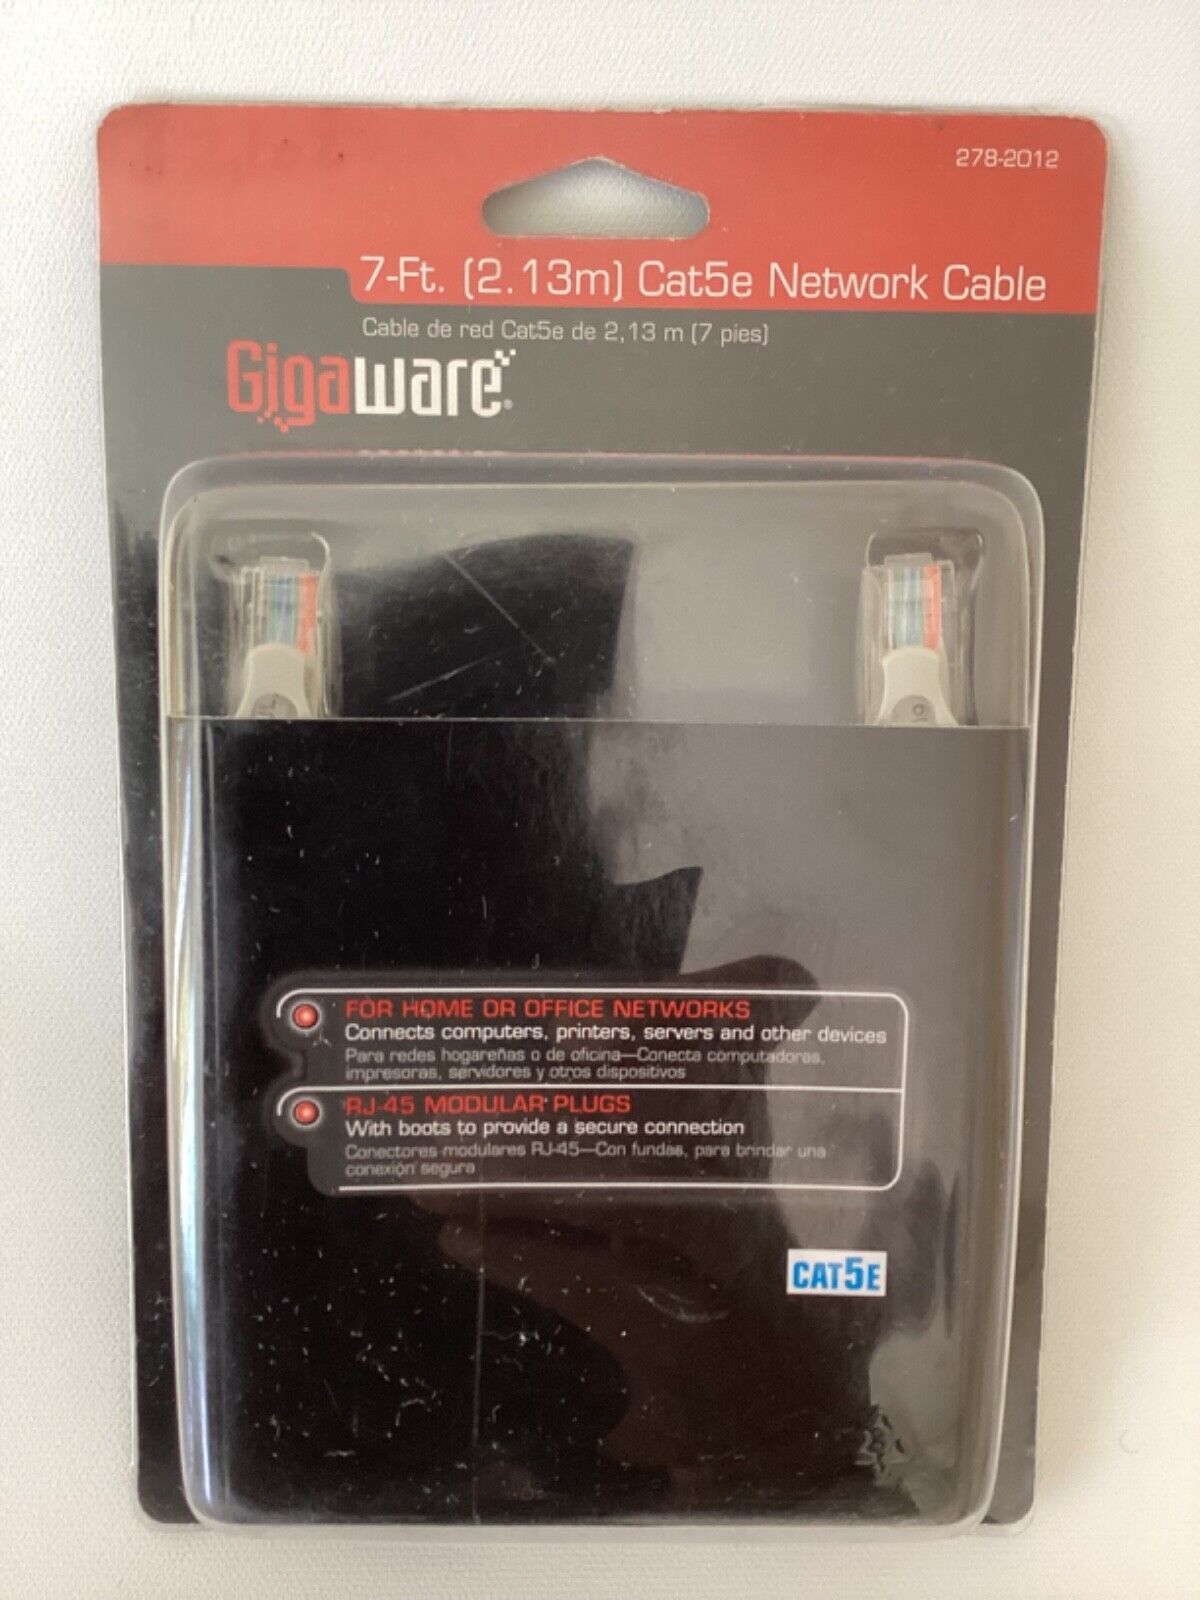 Gigaware Network Cable 7-Ft. (2.13m) Cat5e # 278-2012